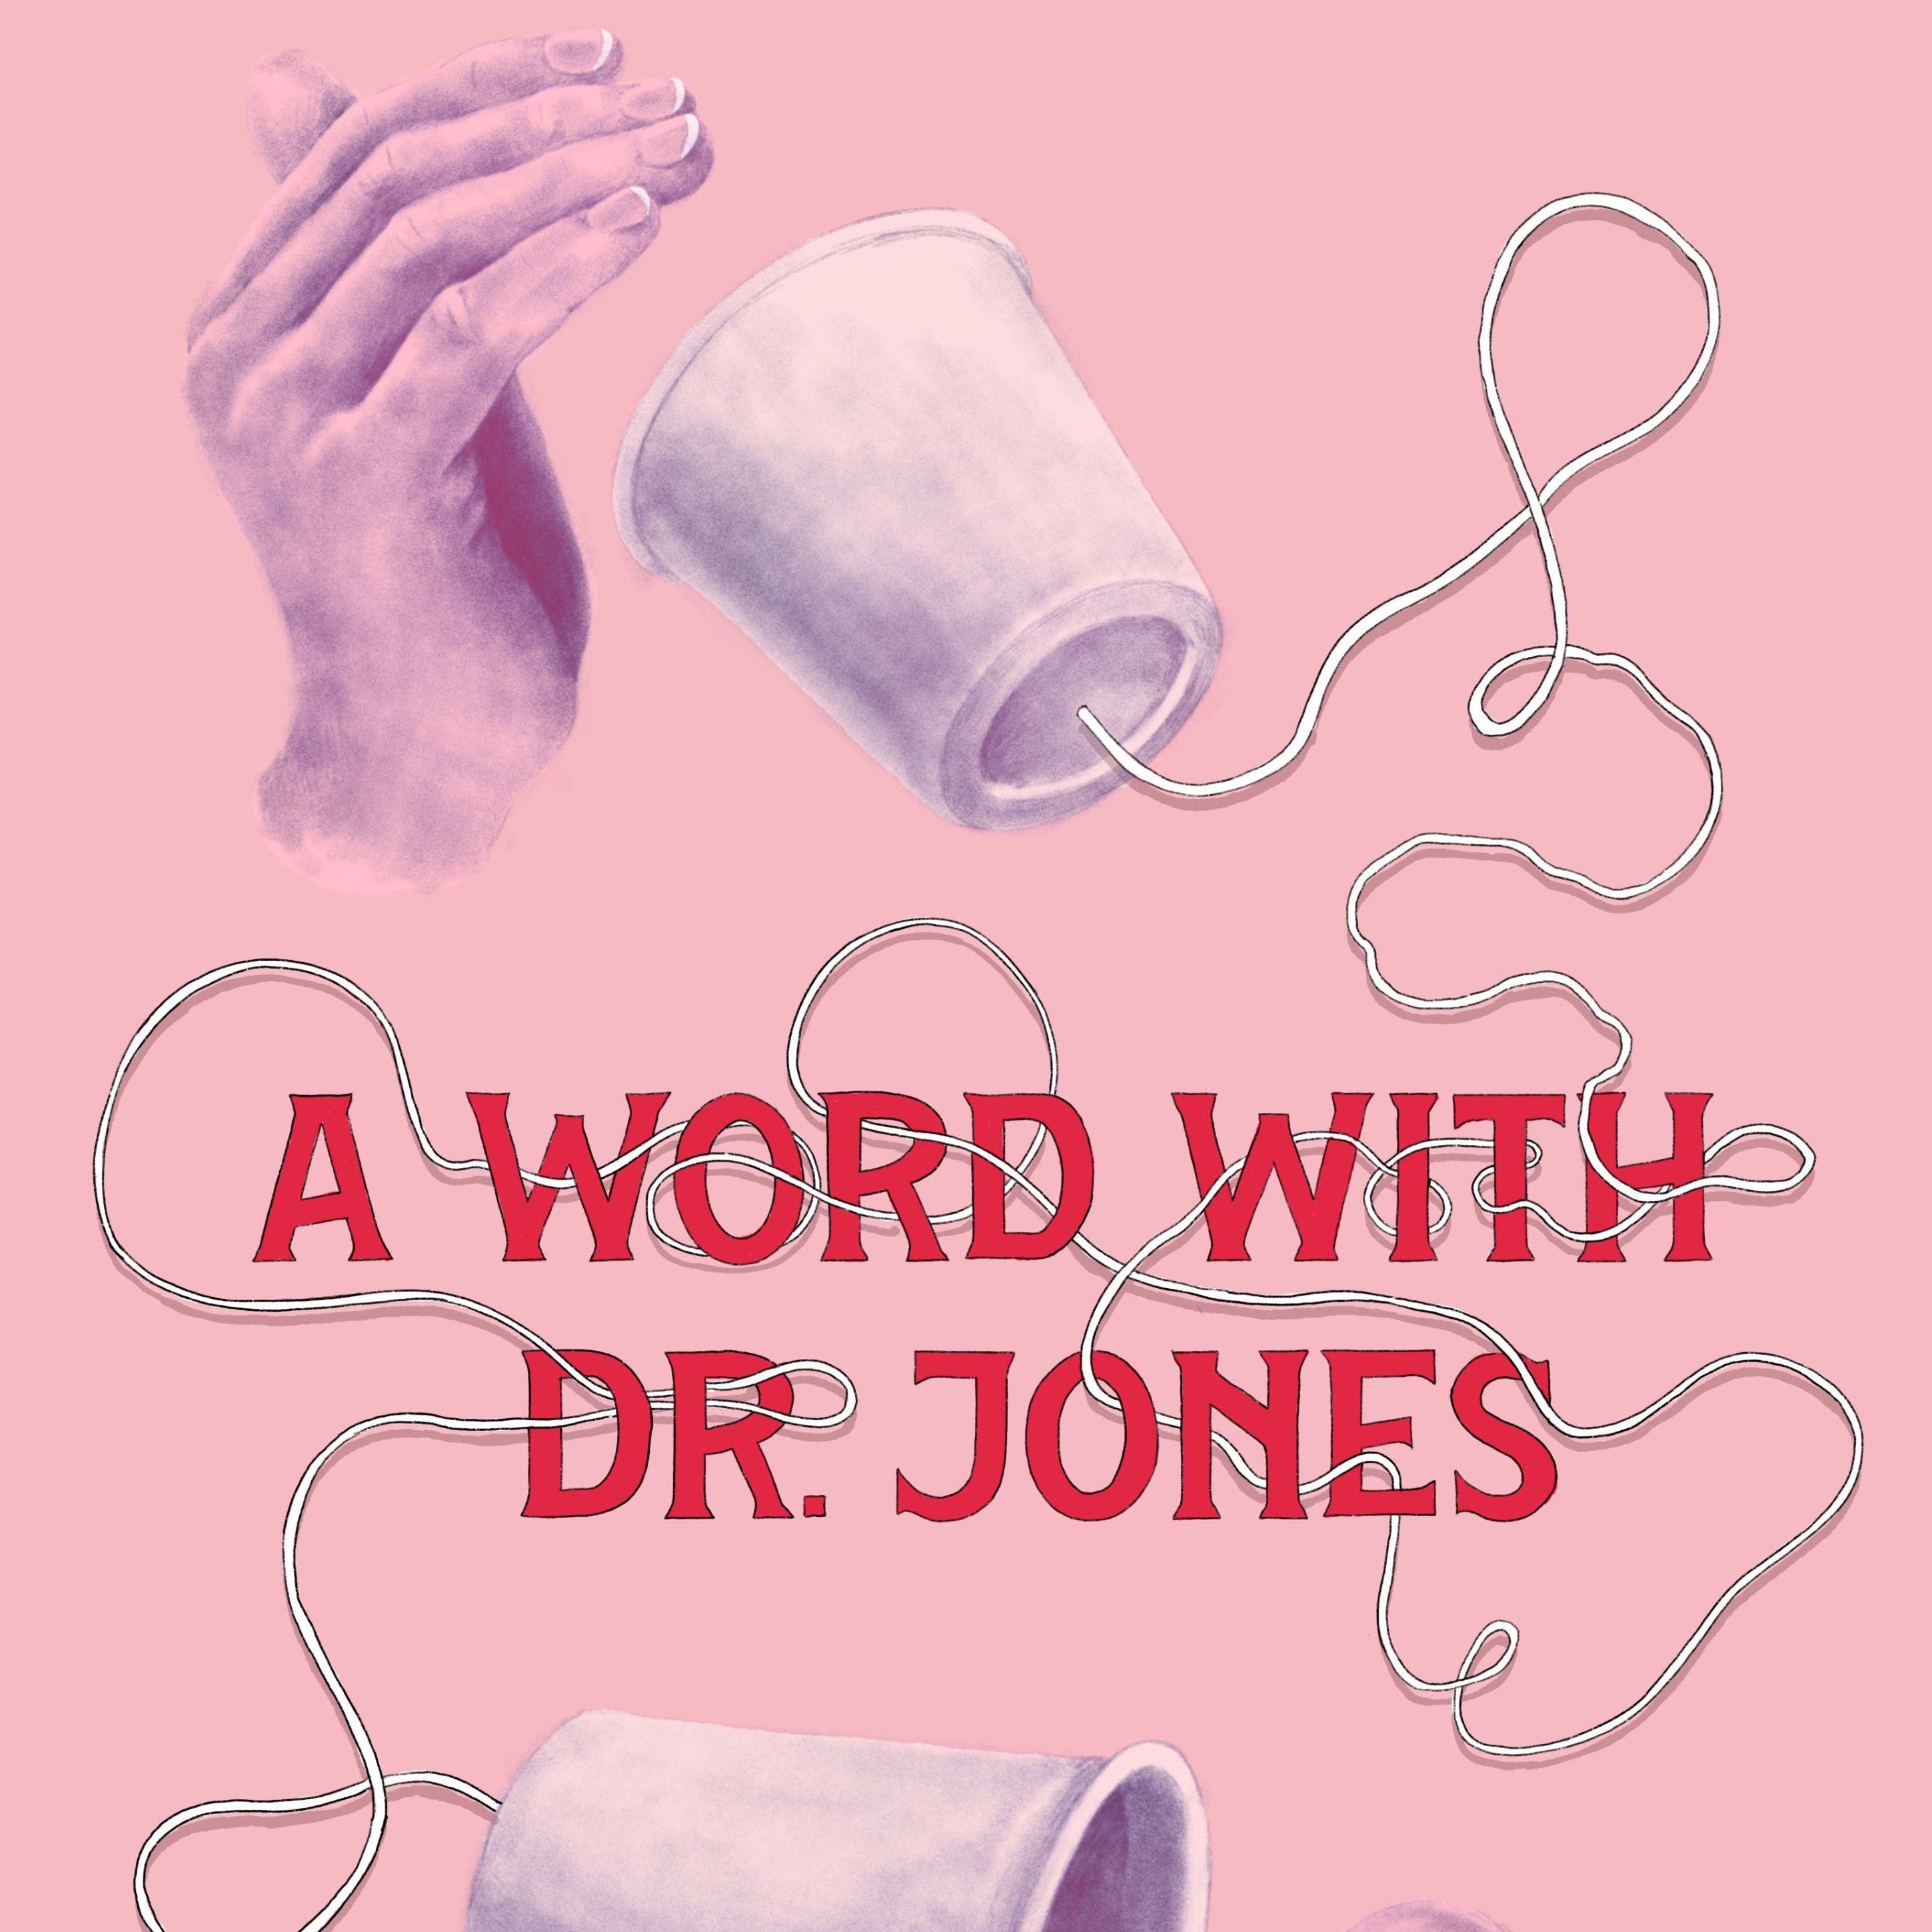 Thumbnail for "227 - A Word with Dr. Jones".